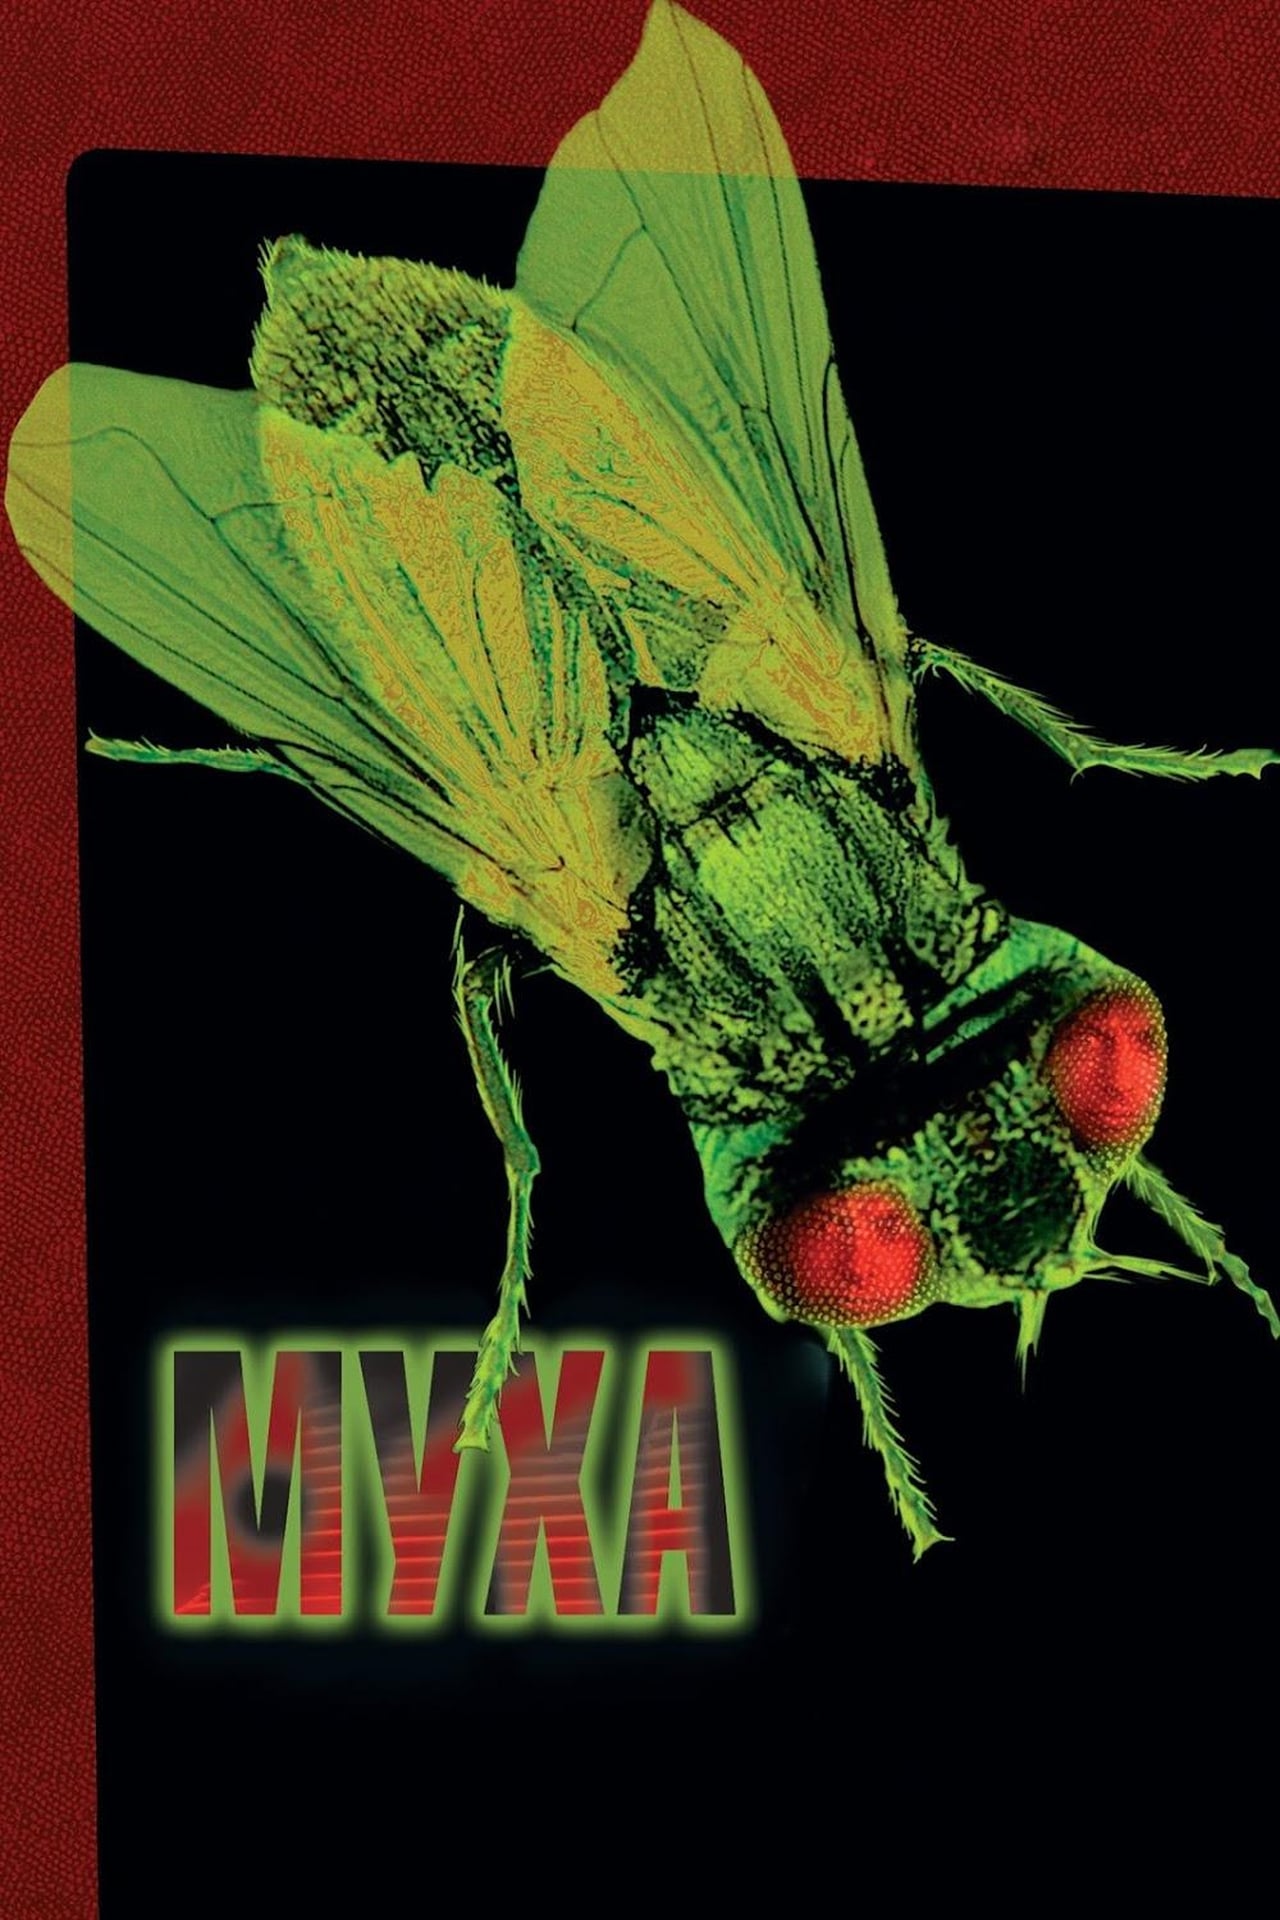 1986 The Fly